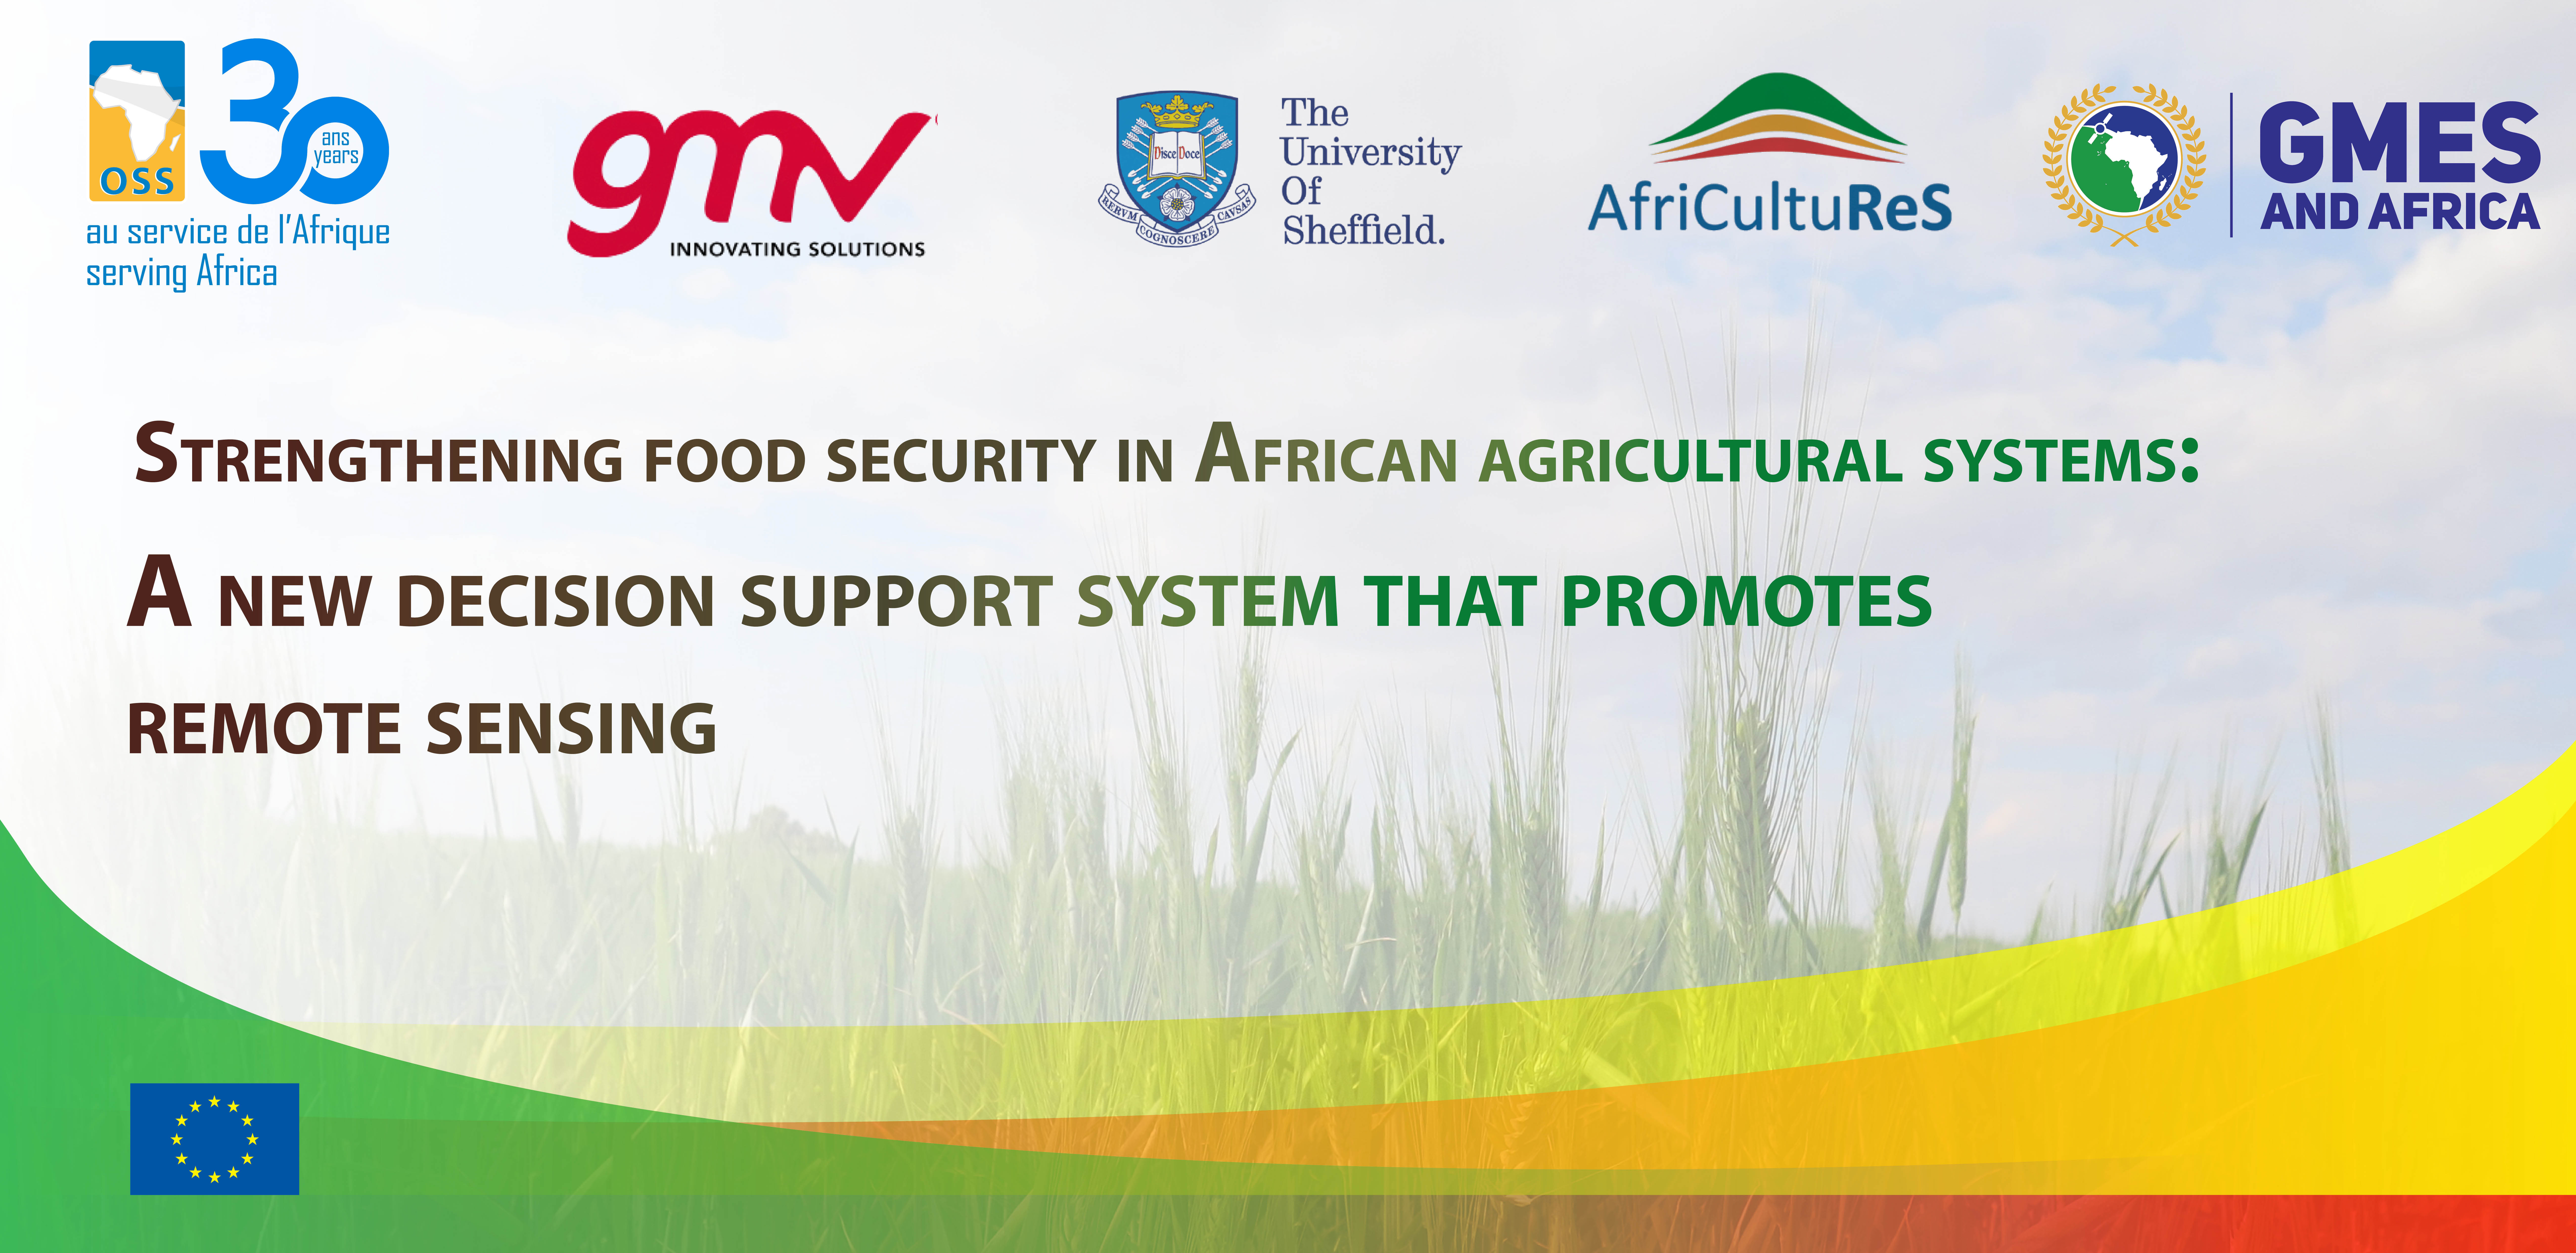  Strengthening food security in African agricultural systems : A new decision support system that promotes remote sensing